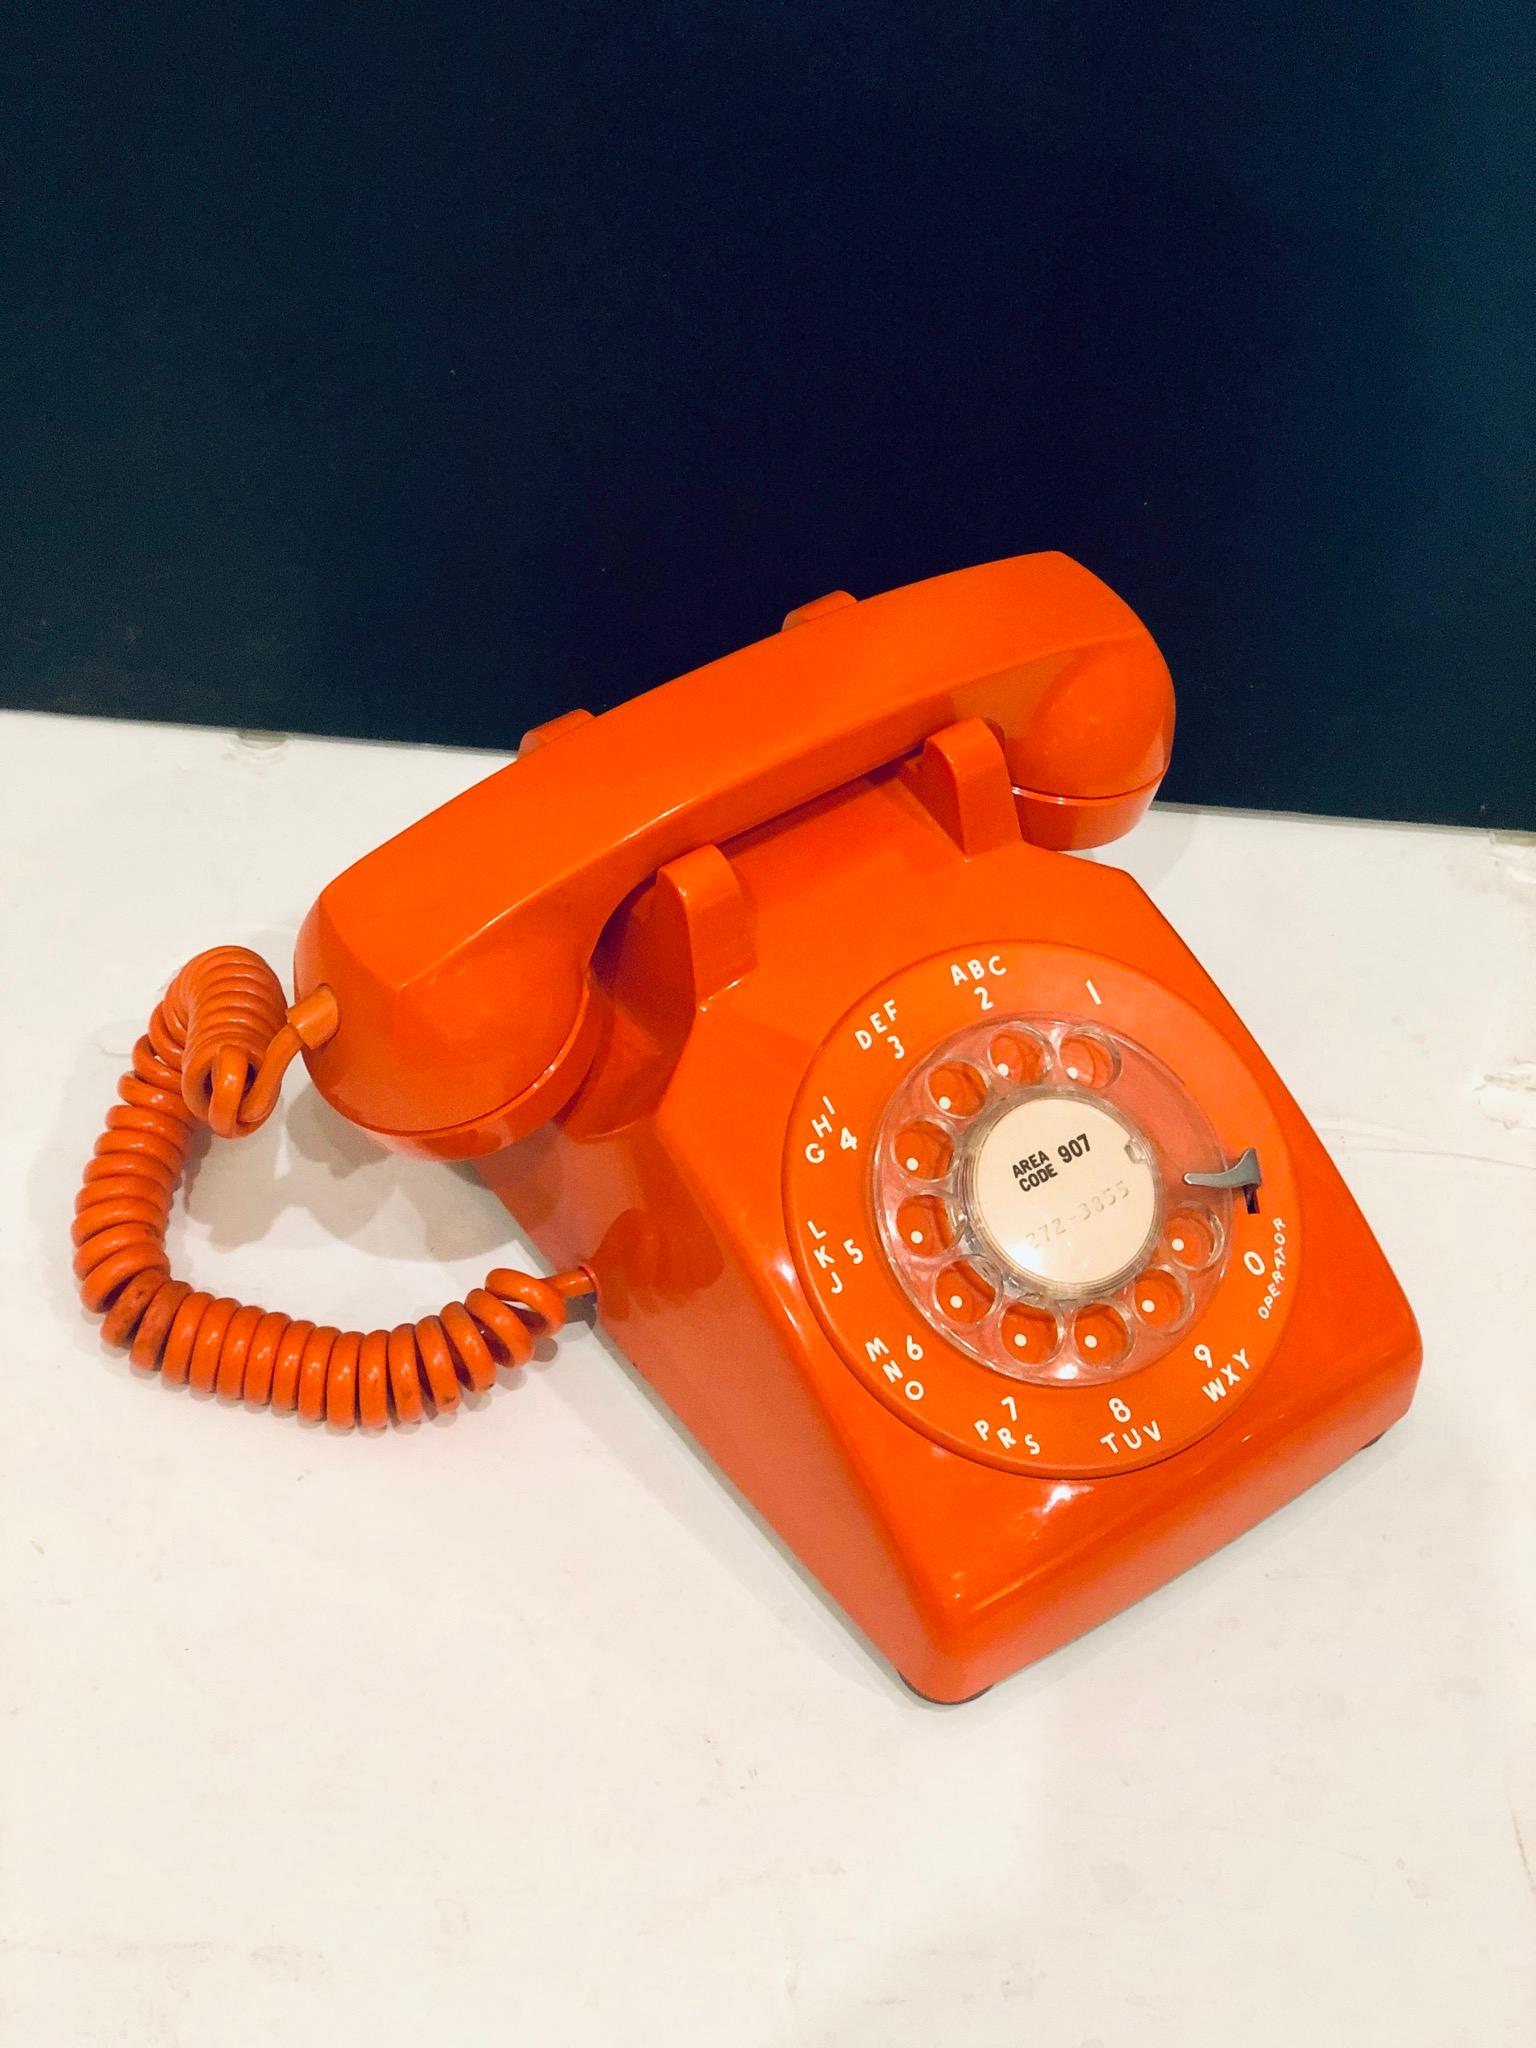 Cool and in working condition 1970's orange rotary phone made by ITT, great clean condition and working with adaptor for new wall plugs.